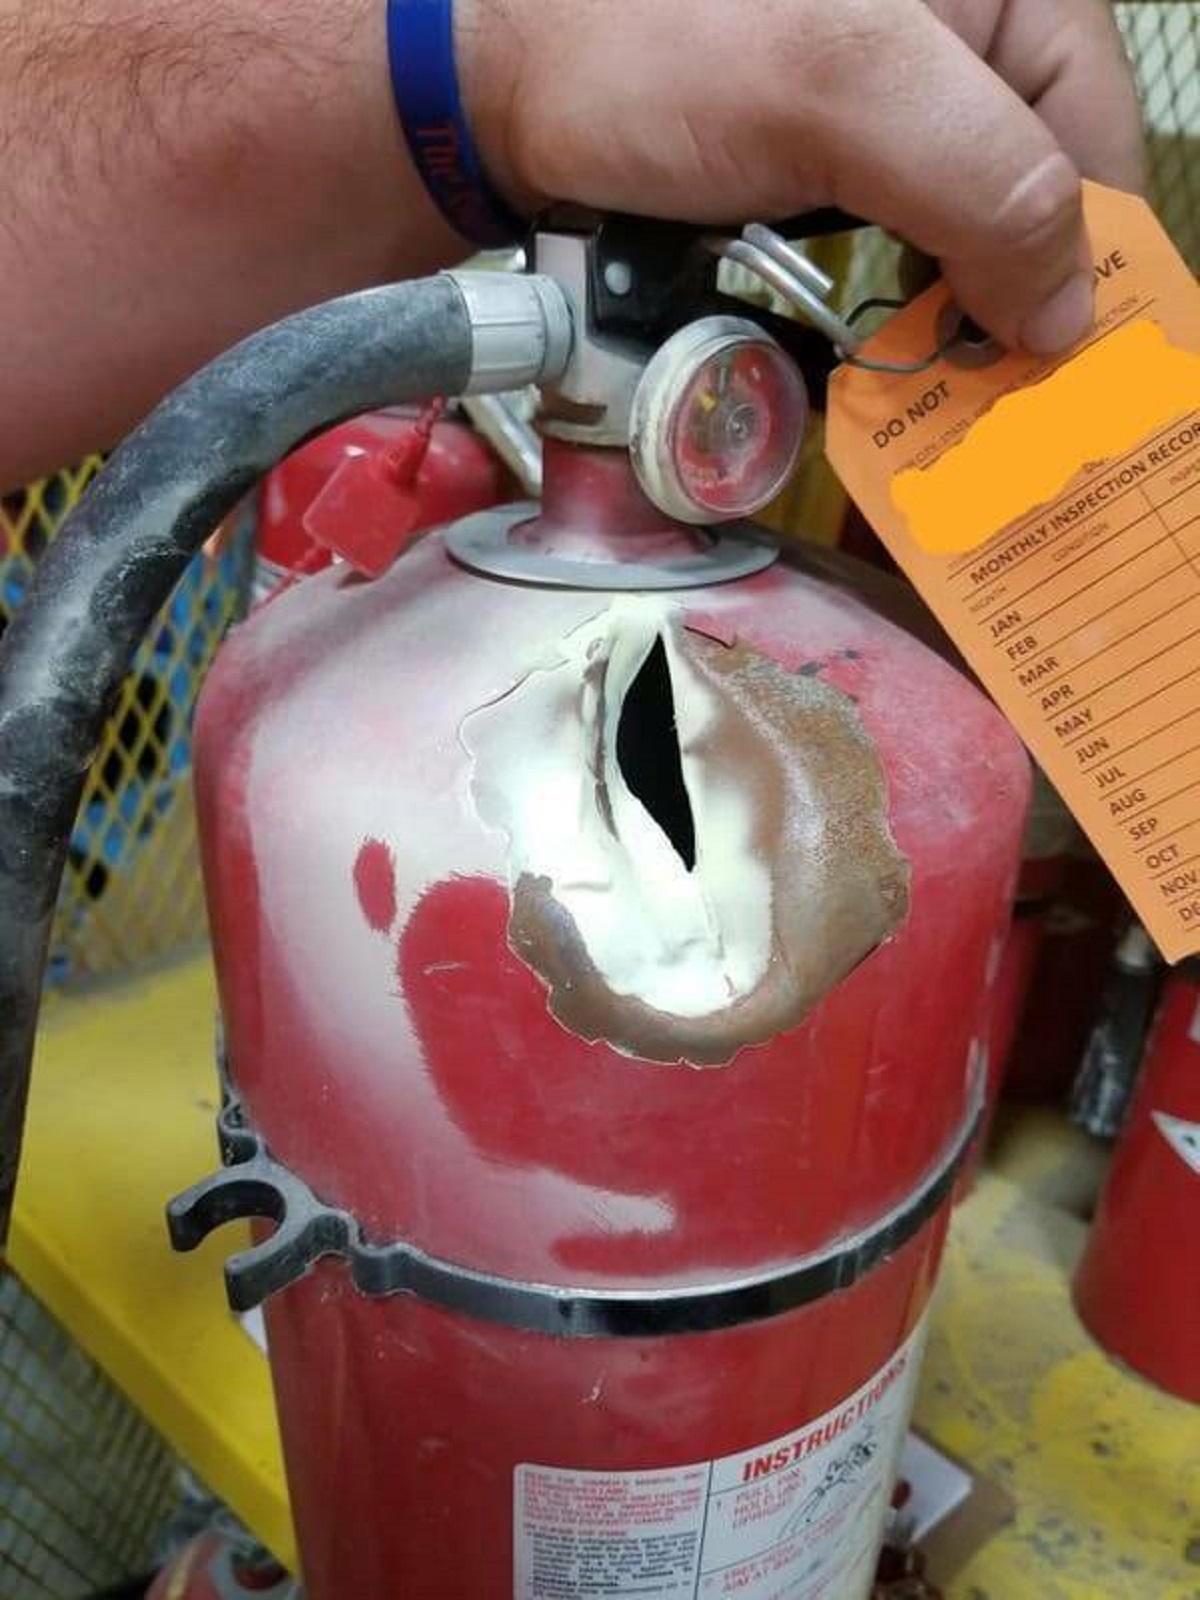 “All these fire extinguisher posts, I figured I would share this one I found as an inspector.”